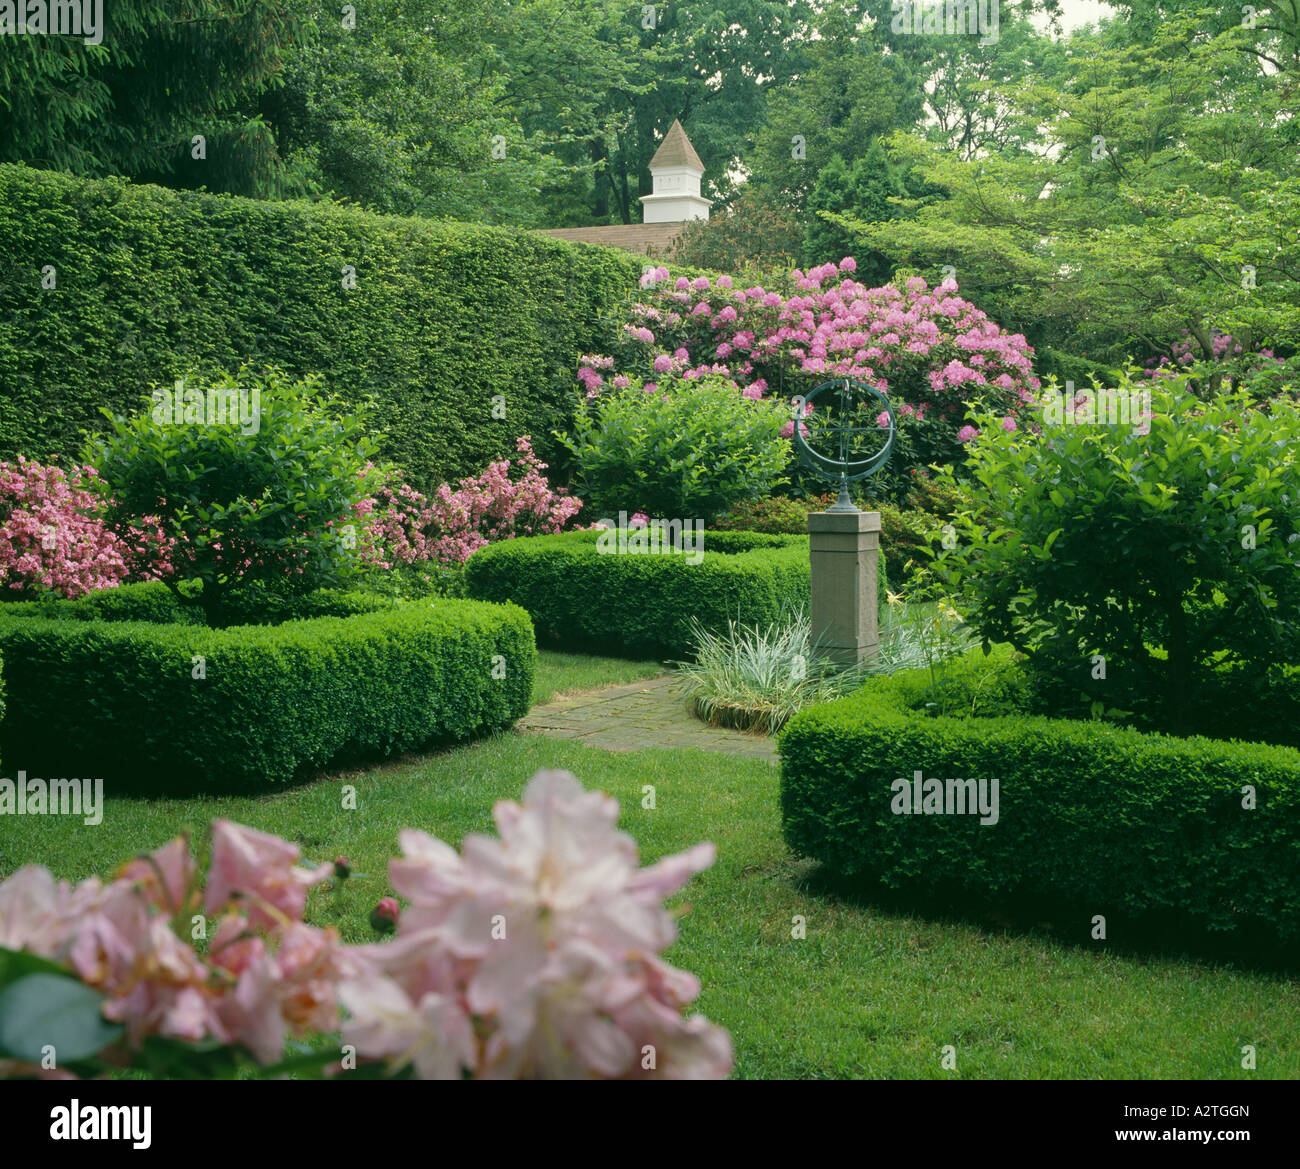 FORMAL GARDEN WITH BOXWOOD (BUXUS SEMPERVIRENS) AND HEMLOCK (TSUGA CANADENSIS) AND MINIATURE CRABAPPLE TREES (MALUS SP.) Stock Photo